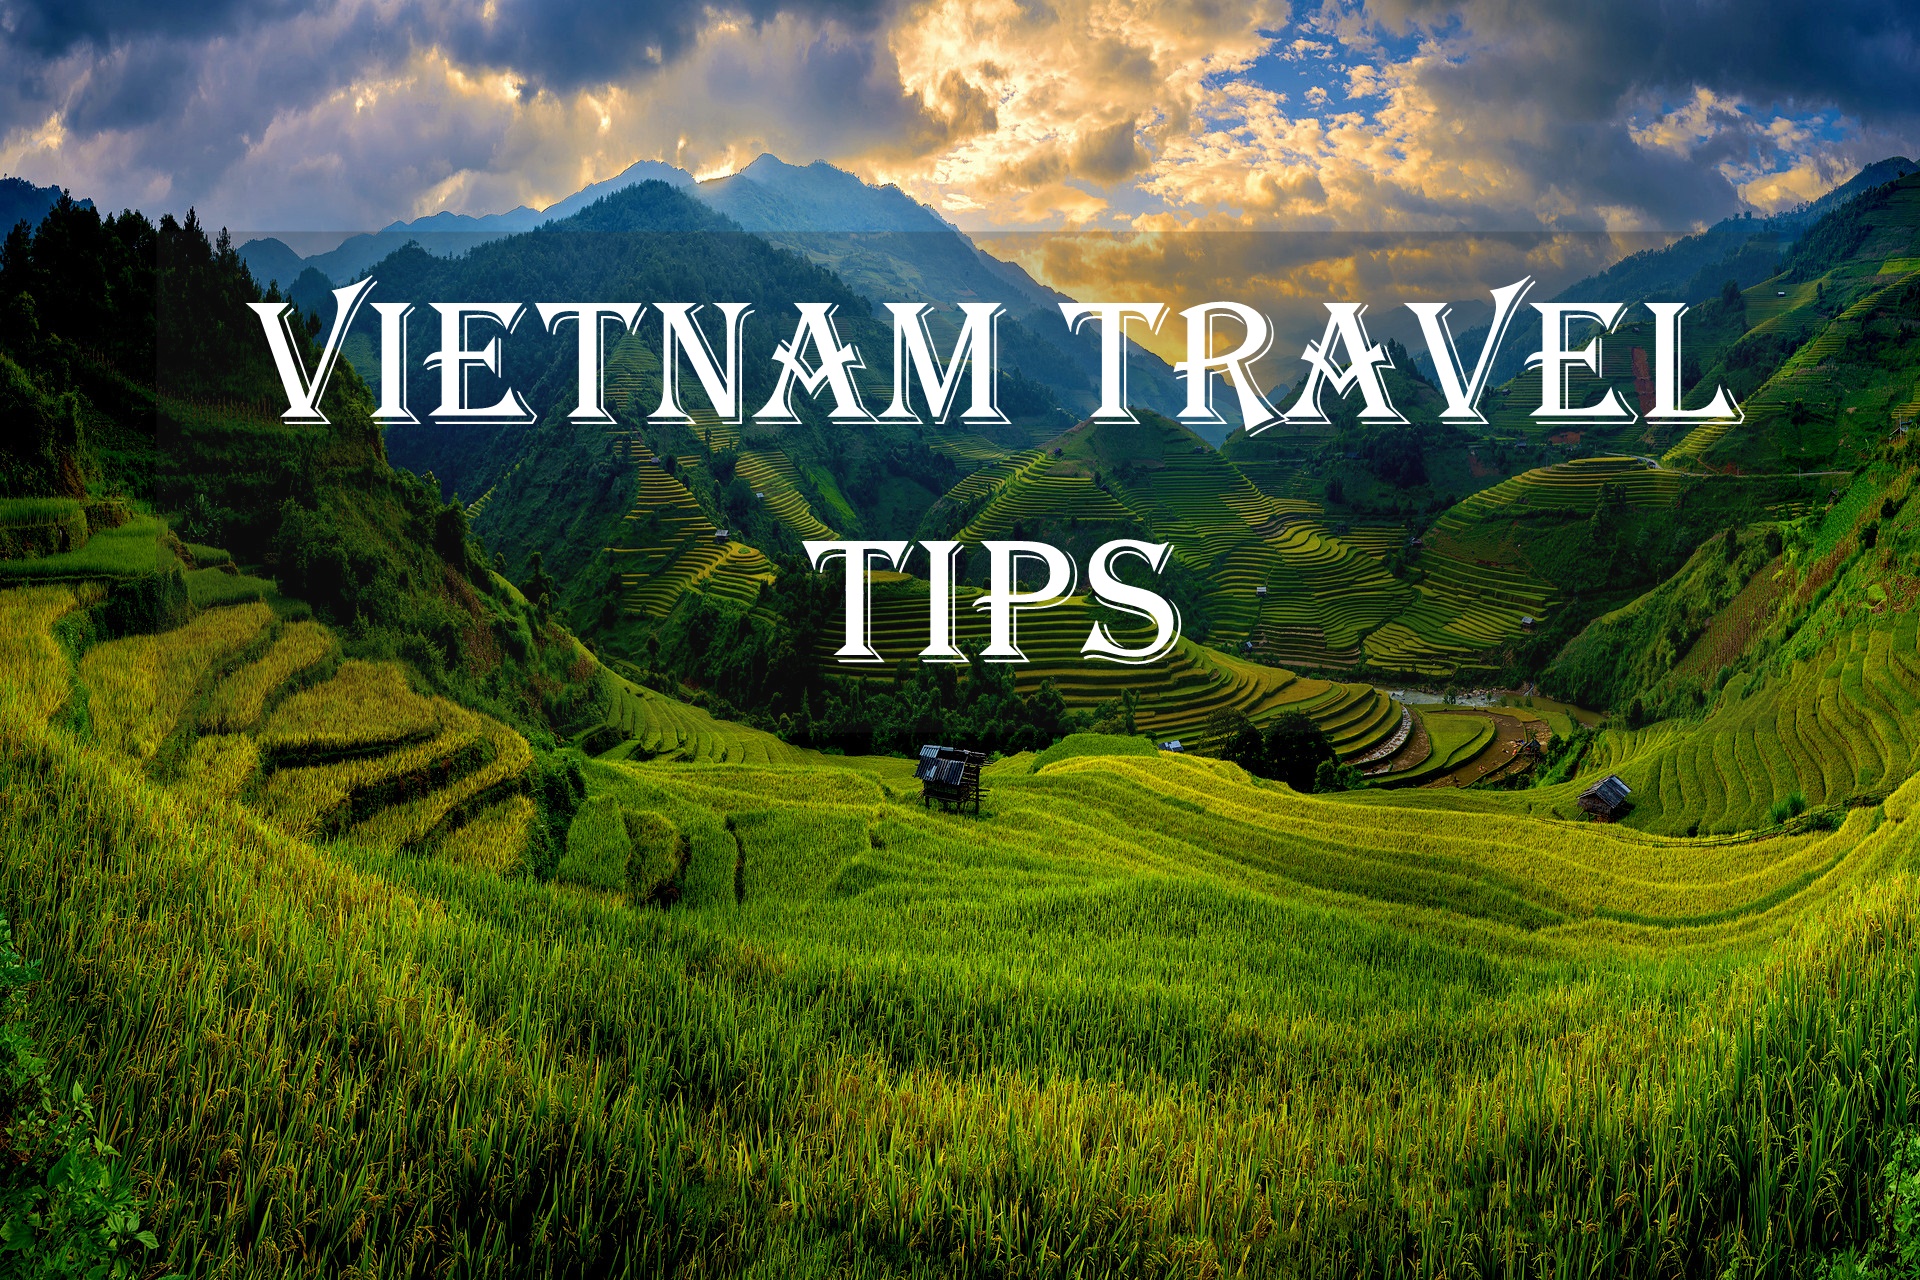 travelling to vietnam tips